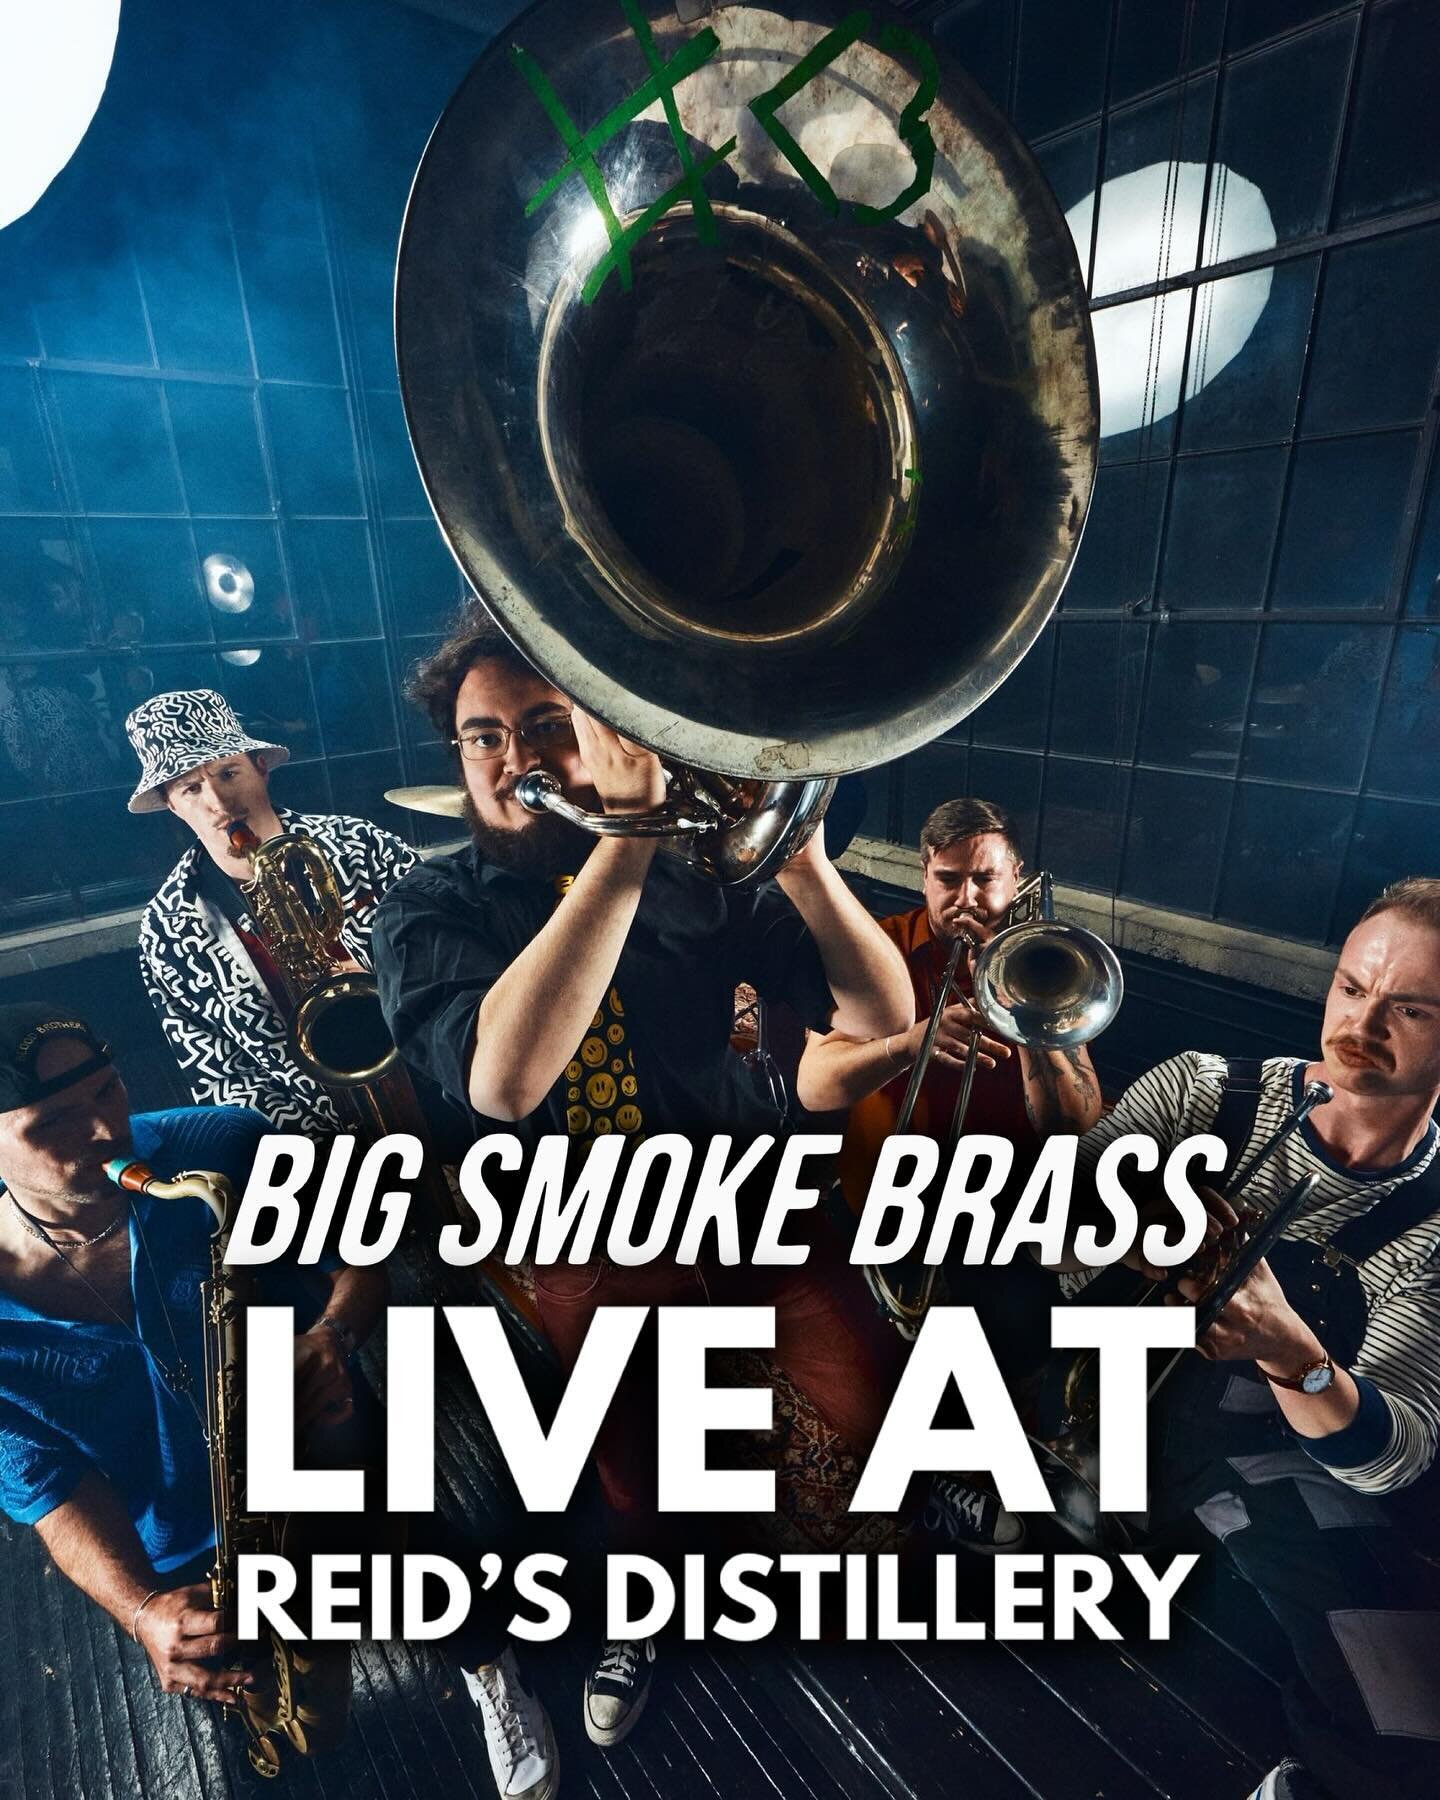 Catch us tomorrow night (Tuesday, March 26) live at Reid&rsquo;s Distillery from 8:00pm-10:00pm!

We&rsquo;ll be playing two sets of new original music, and some awesome covers of your favourite hits! 

@reidsdistillery is one of our favourite venues